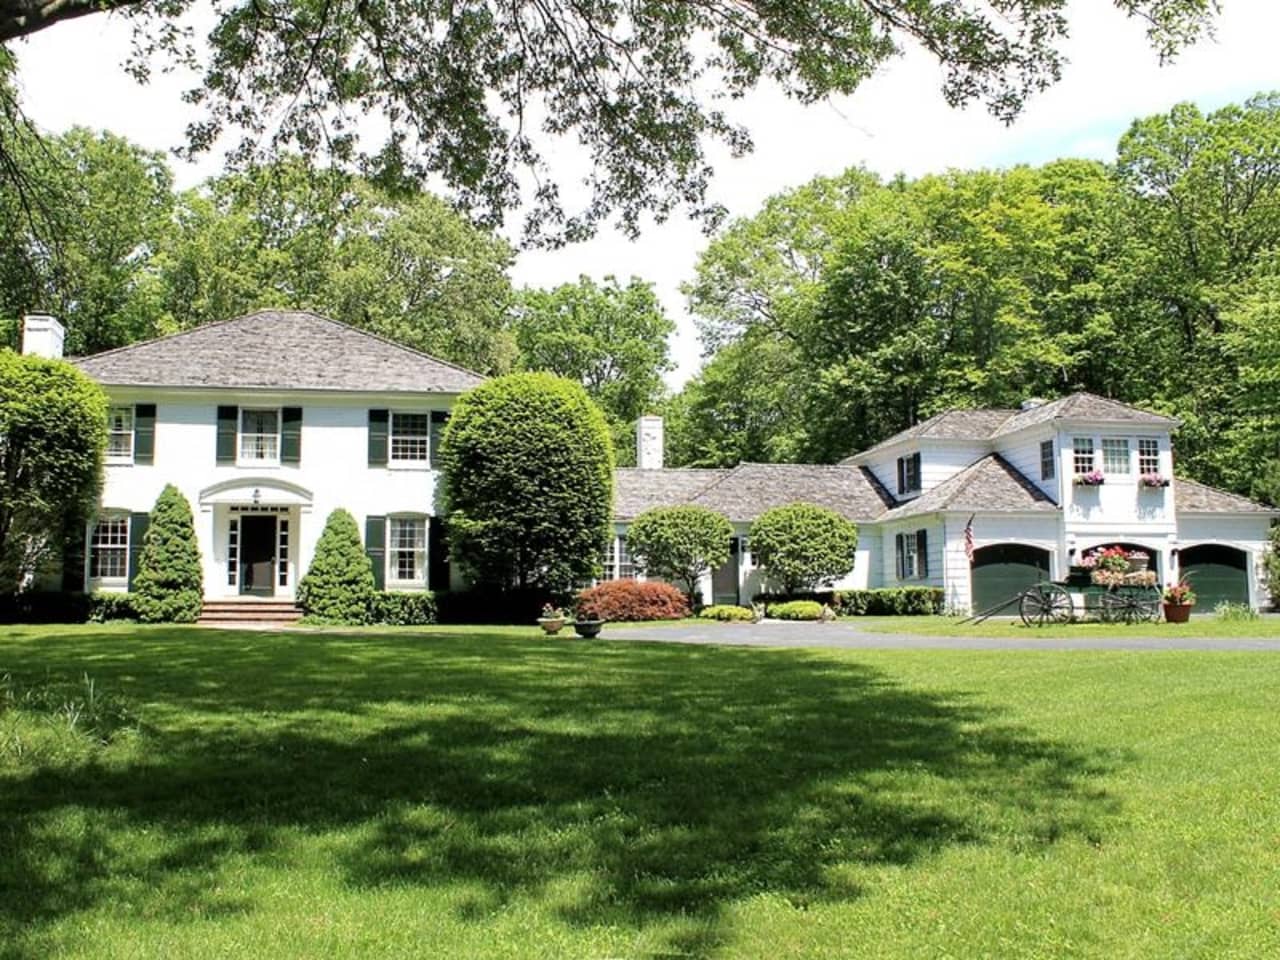 The home at 49 White Fall Lane in New Canaan will be open from 2 to 4 p.m. on Sunday. 